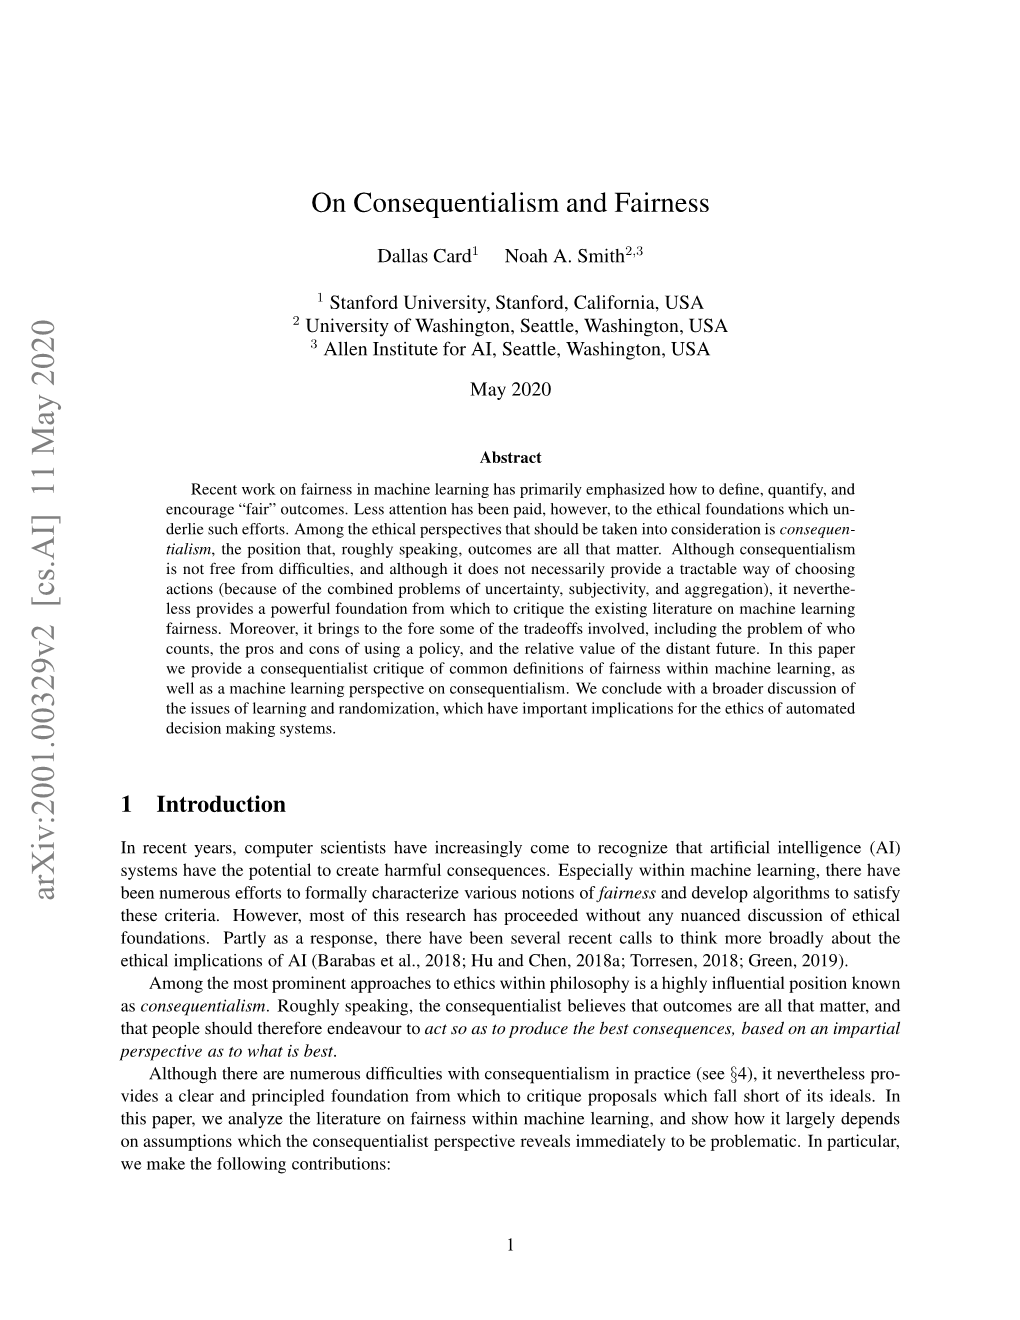 On Consequentialism and Fairness